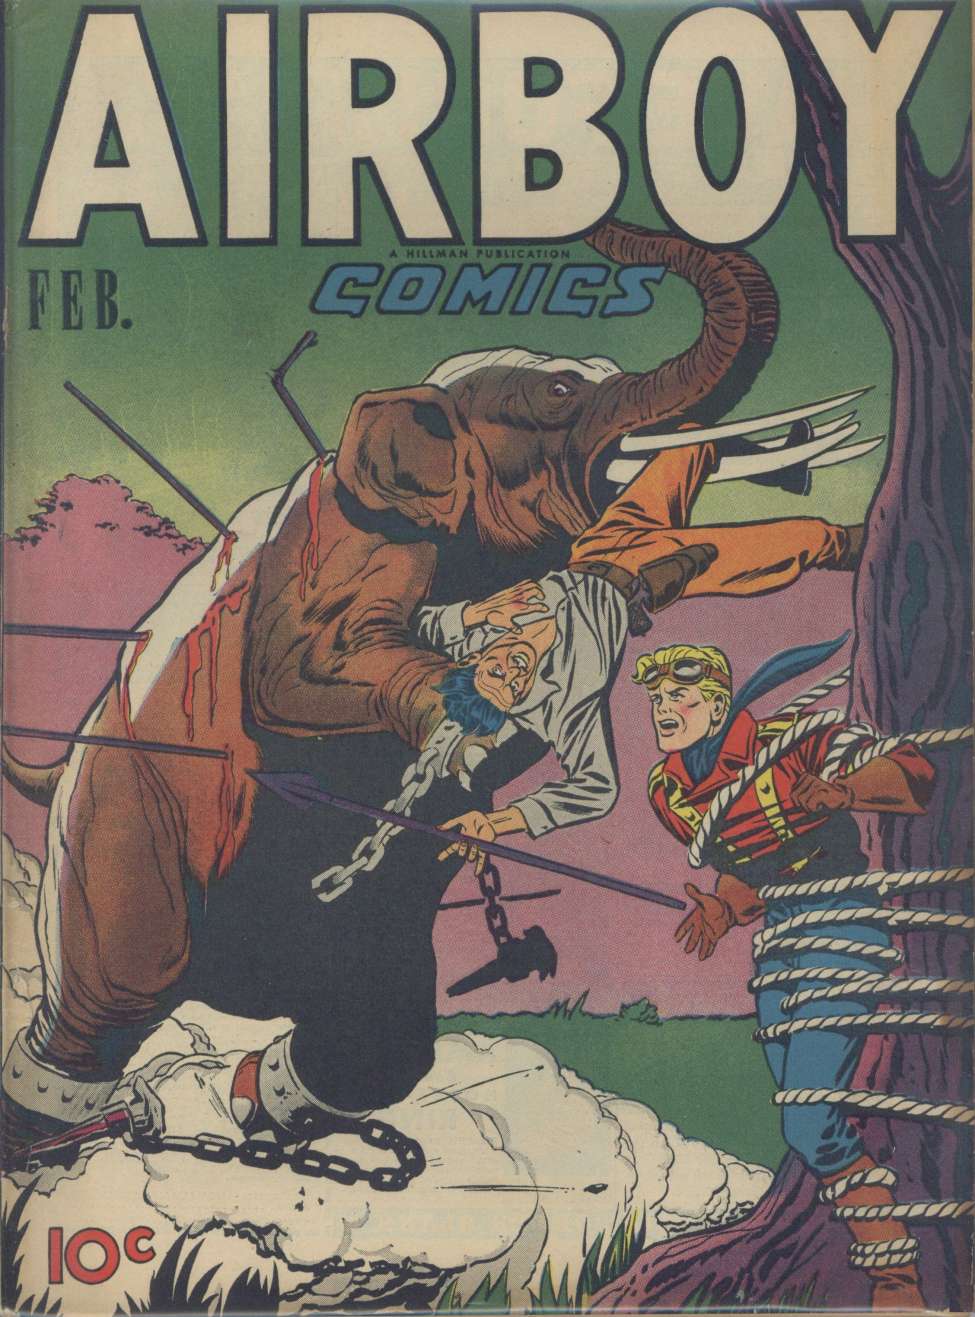 Book Cover For Airboy Comics v4 1